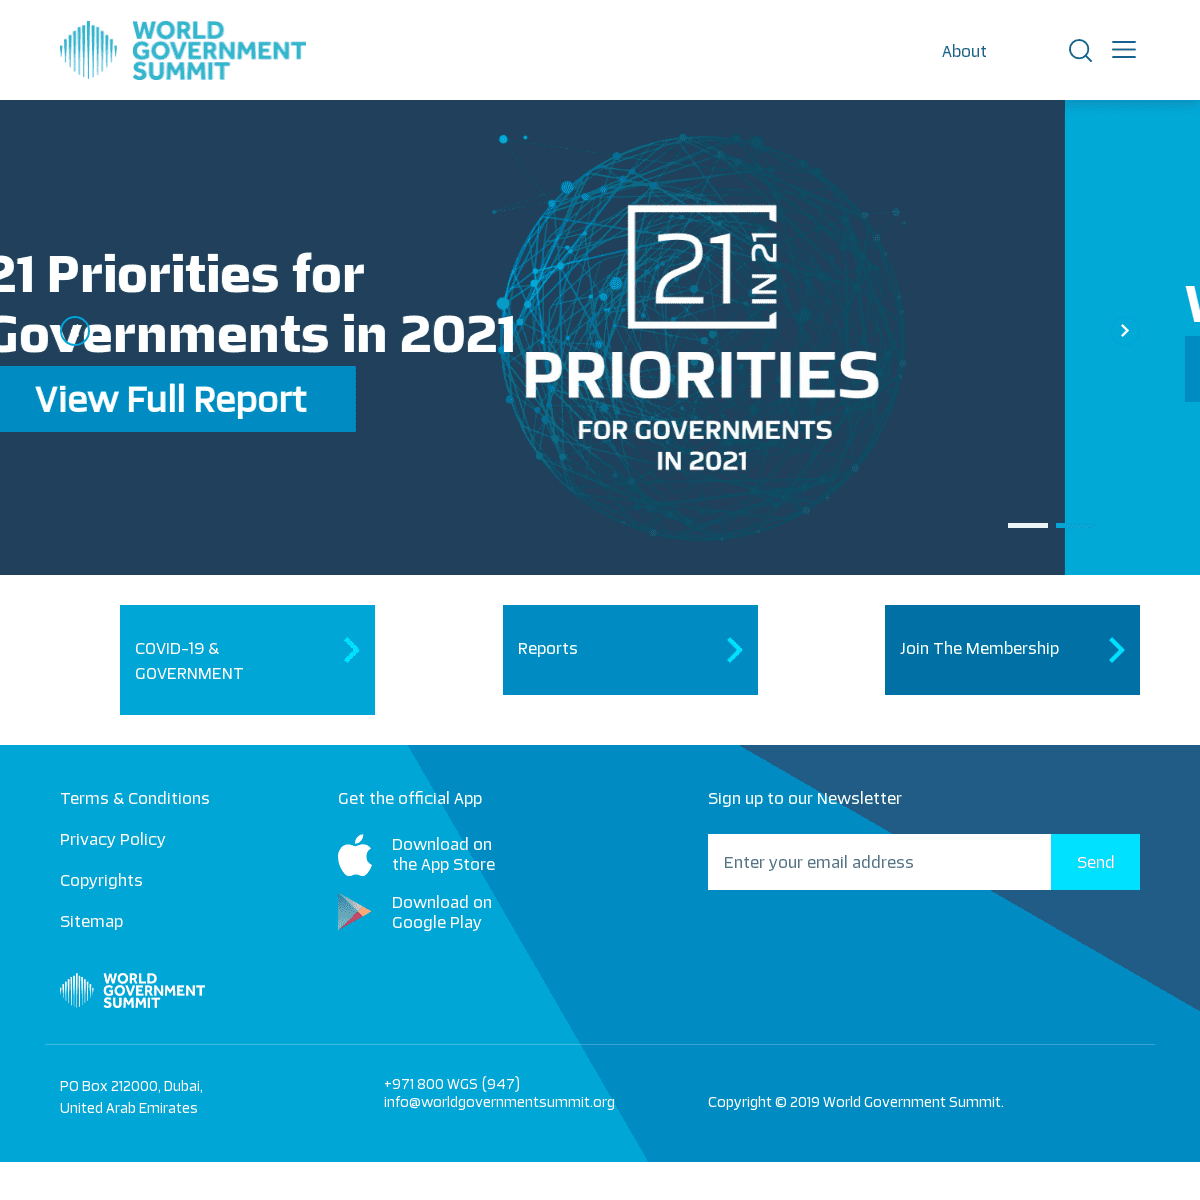 A complete backup of https://worldgovernmentsummit.org